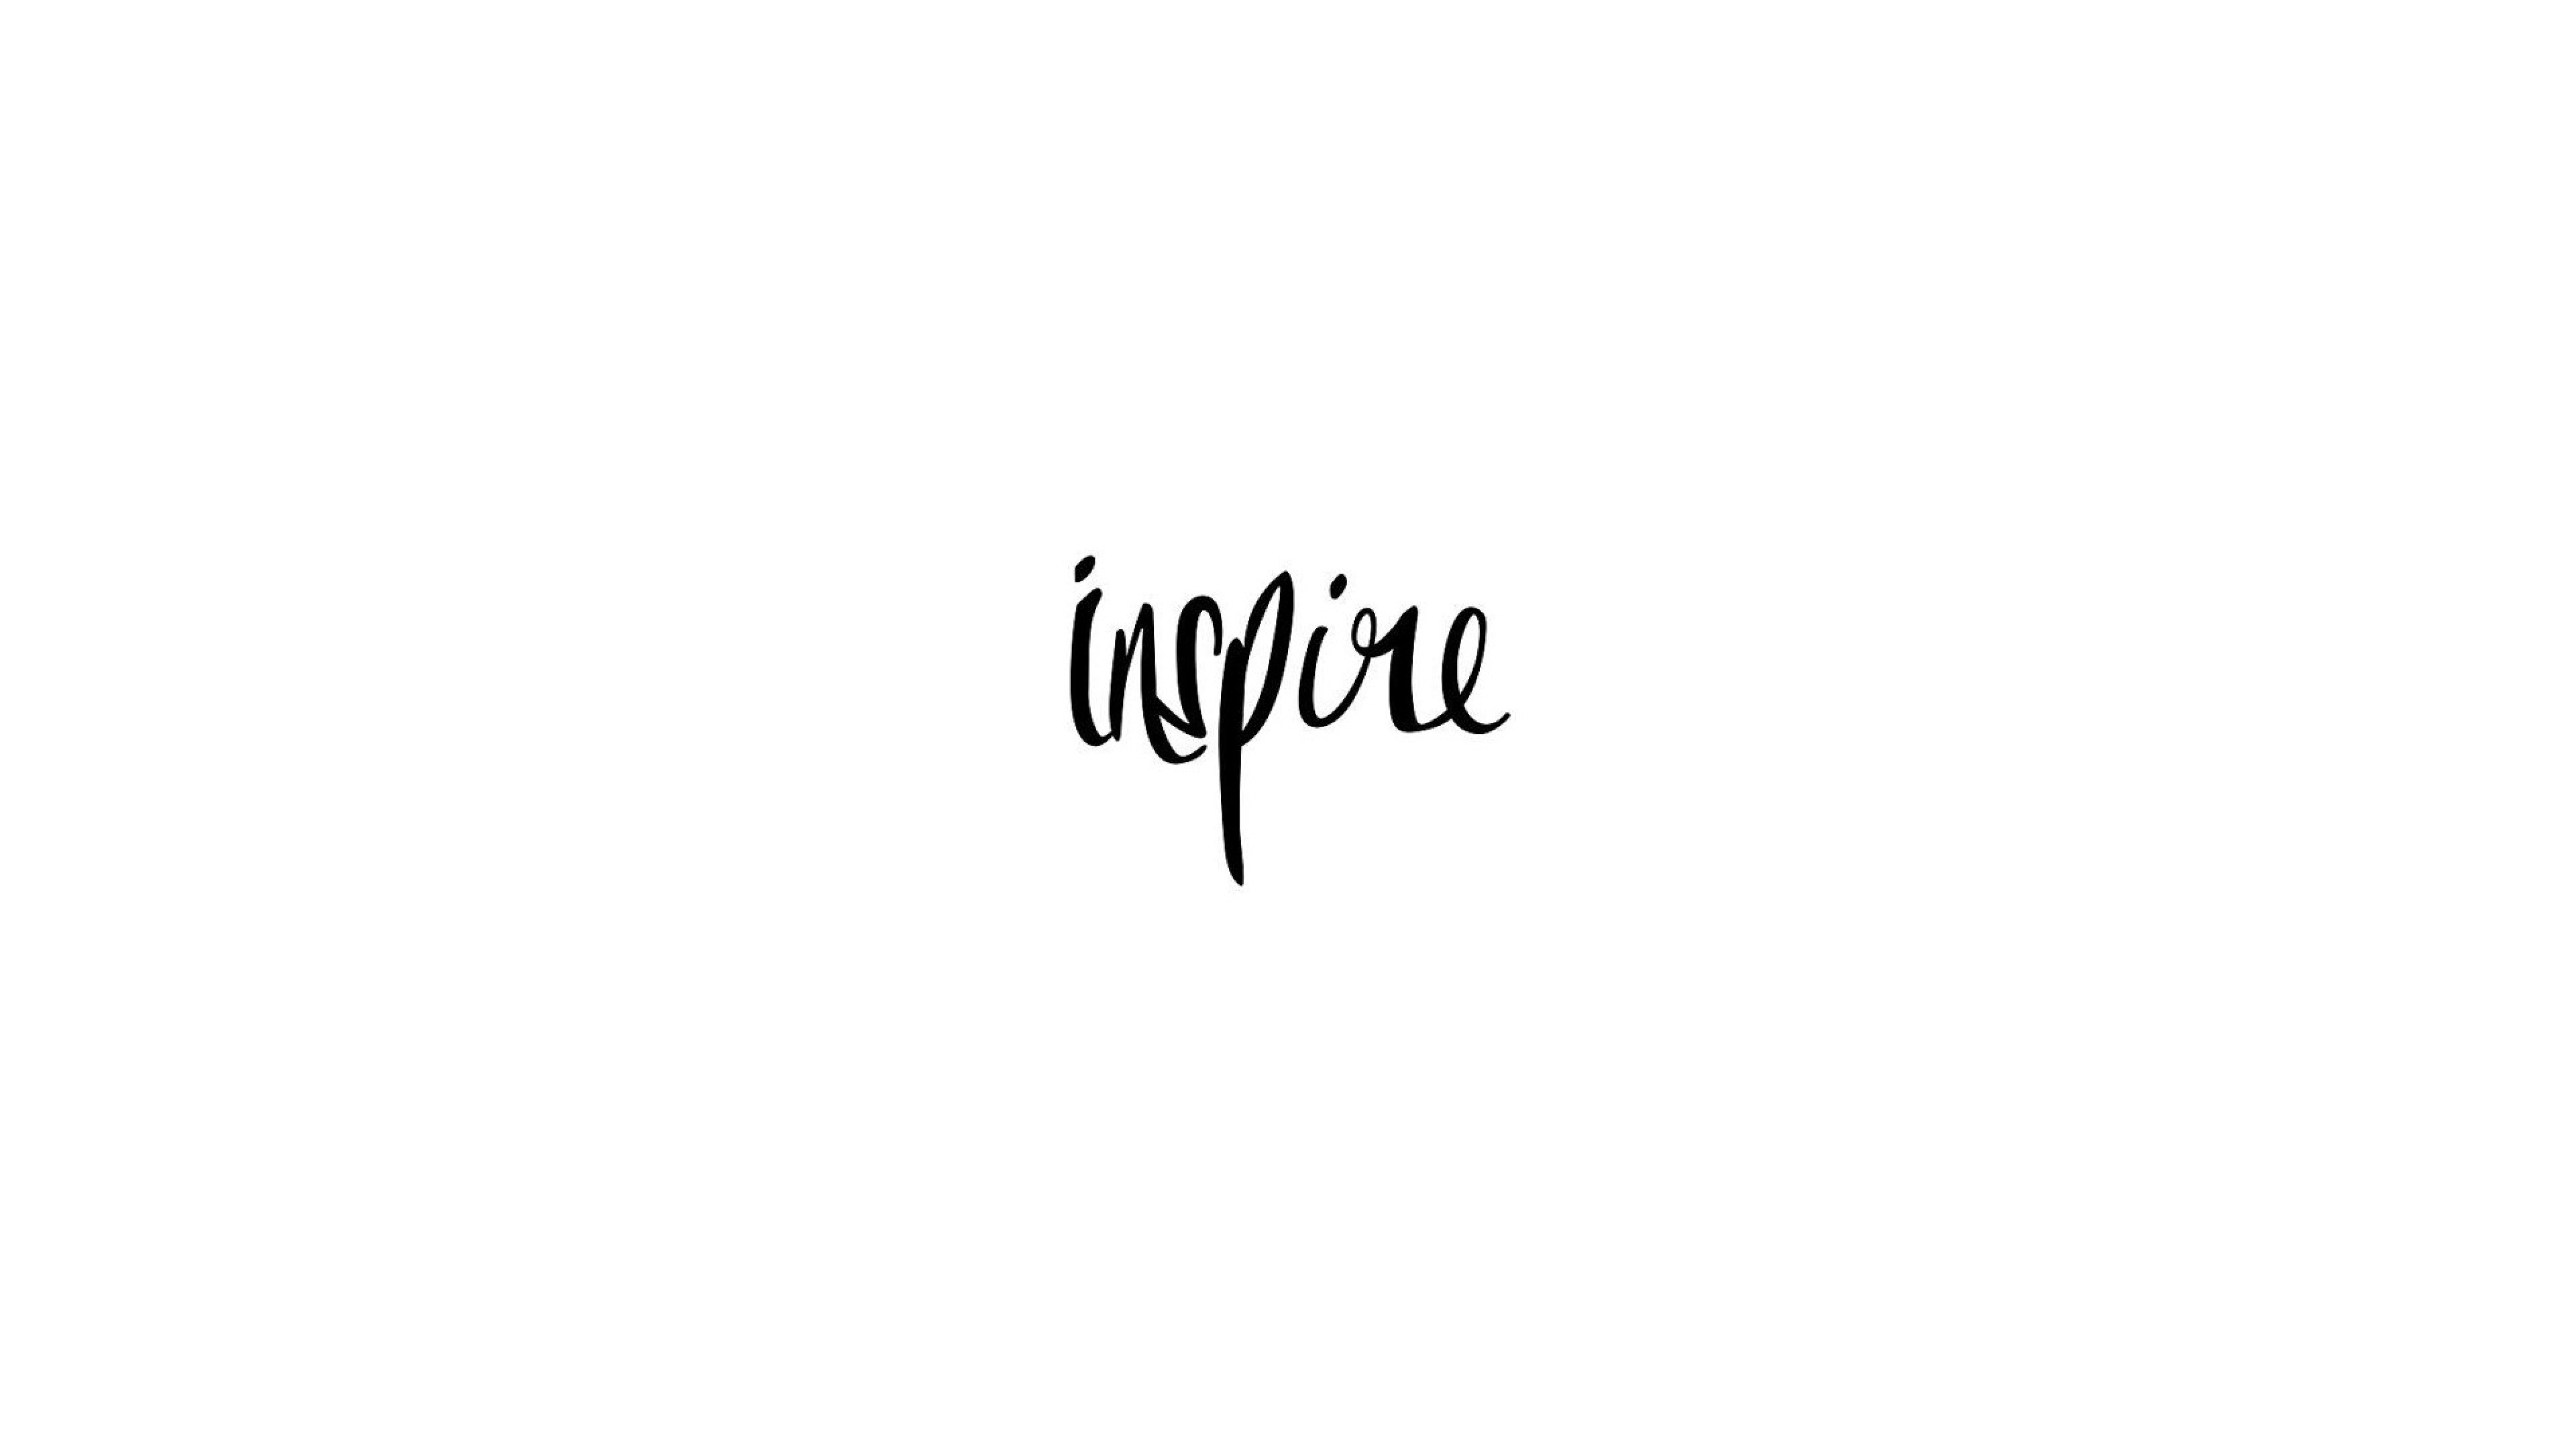 Inspire Backgrounds